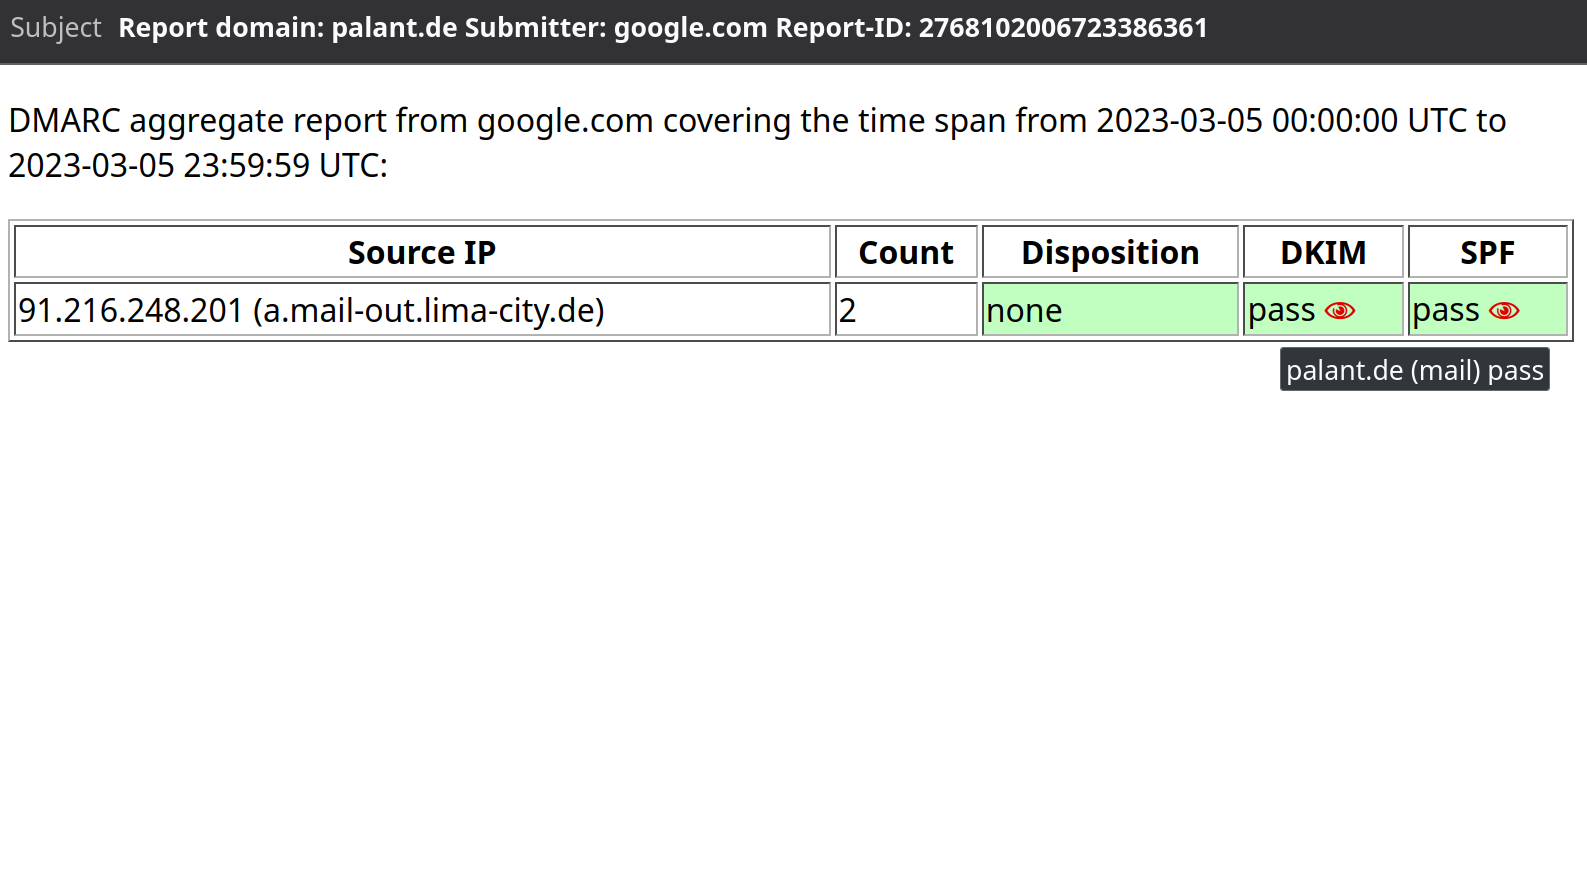 Screenshot of an email with the subject “Report domain: palant.de Submitter: google.com Report-ID: 2768102006723386361” Email text says: DMARC aggregate report from google.com covering the time span from 2023-03-05 00:00:00 UTC to 2023-03-05 23:59:59 UTC: Source IP: 91.216.248.201 (a.mail-out.lima-city.de). Count: 2. Disposition: none. DKIM: pass 👁. SPF: pass 👁